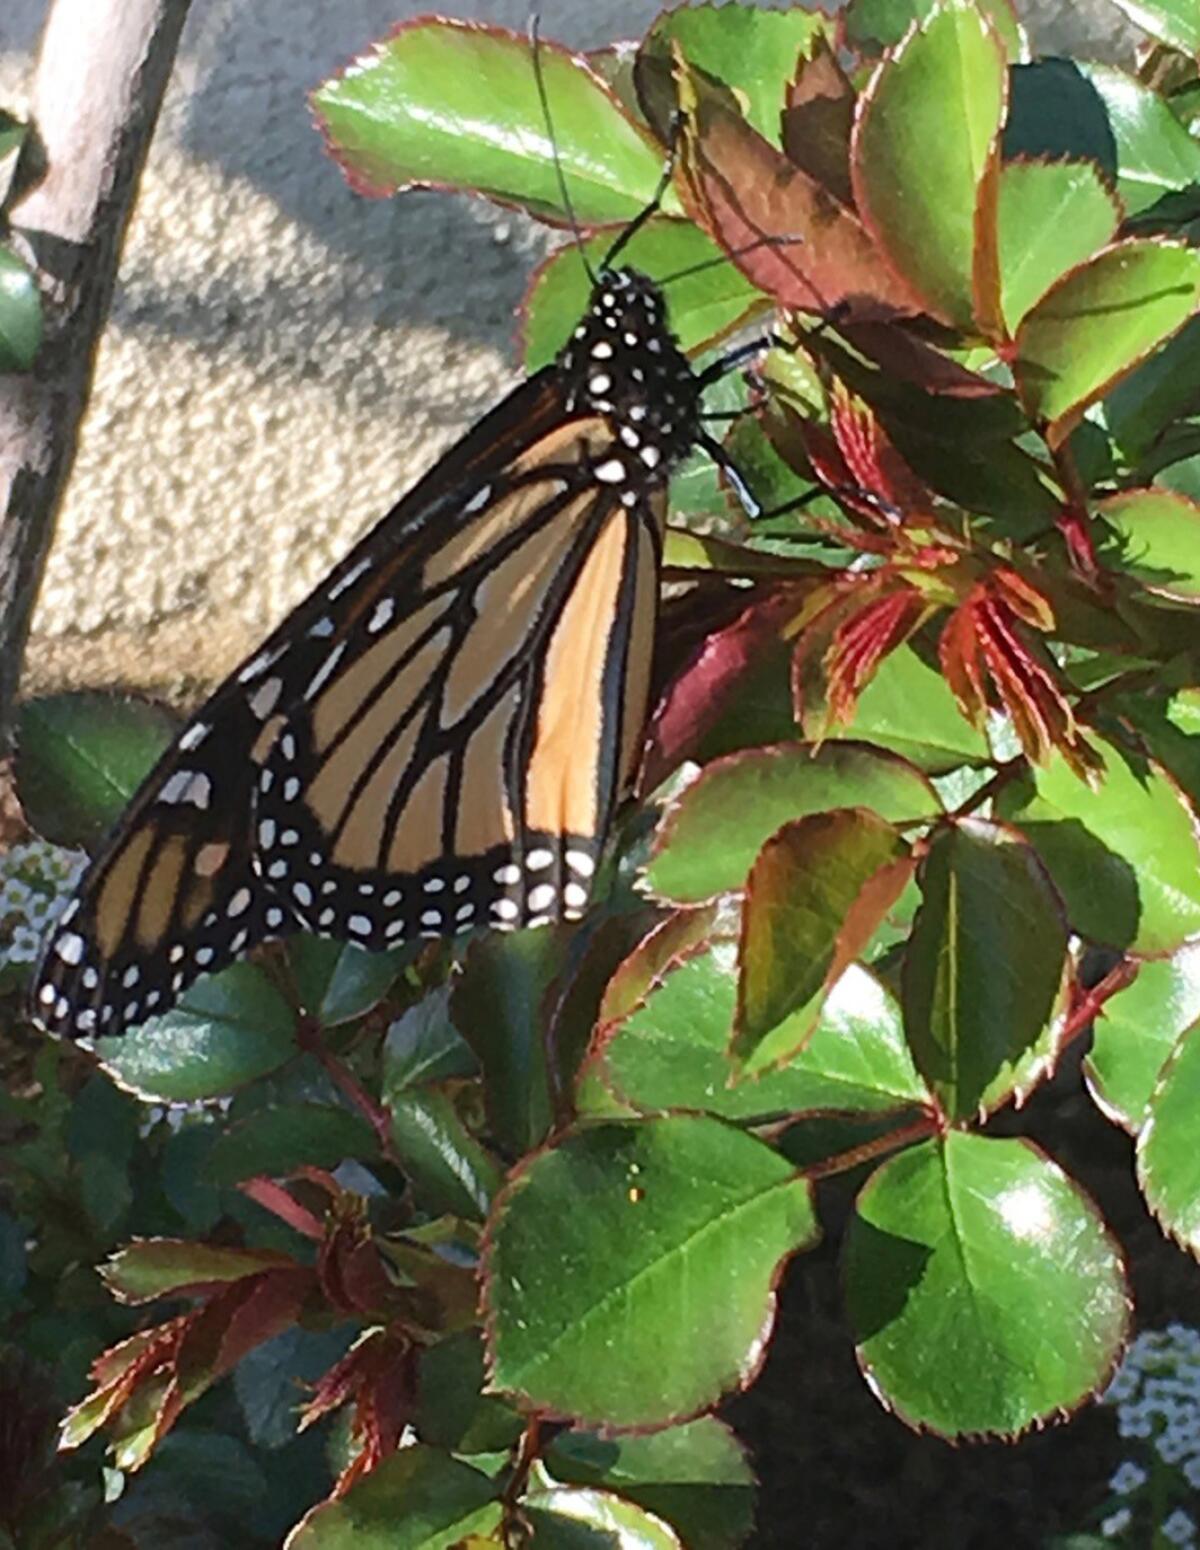 The monarch butterfly, an important pollinator, is one of the garden's welcome guests.